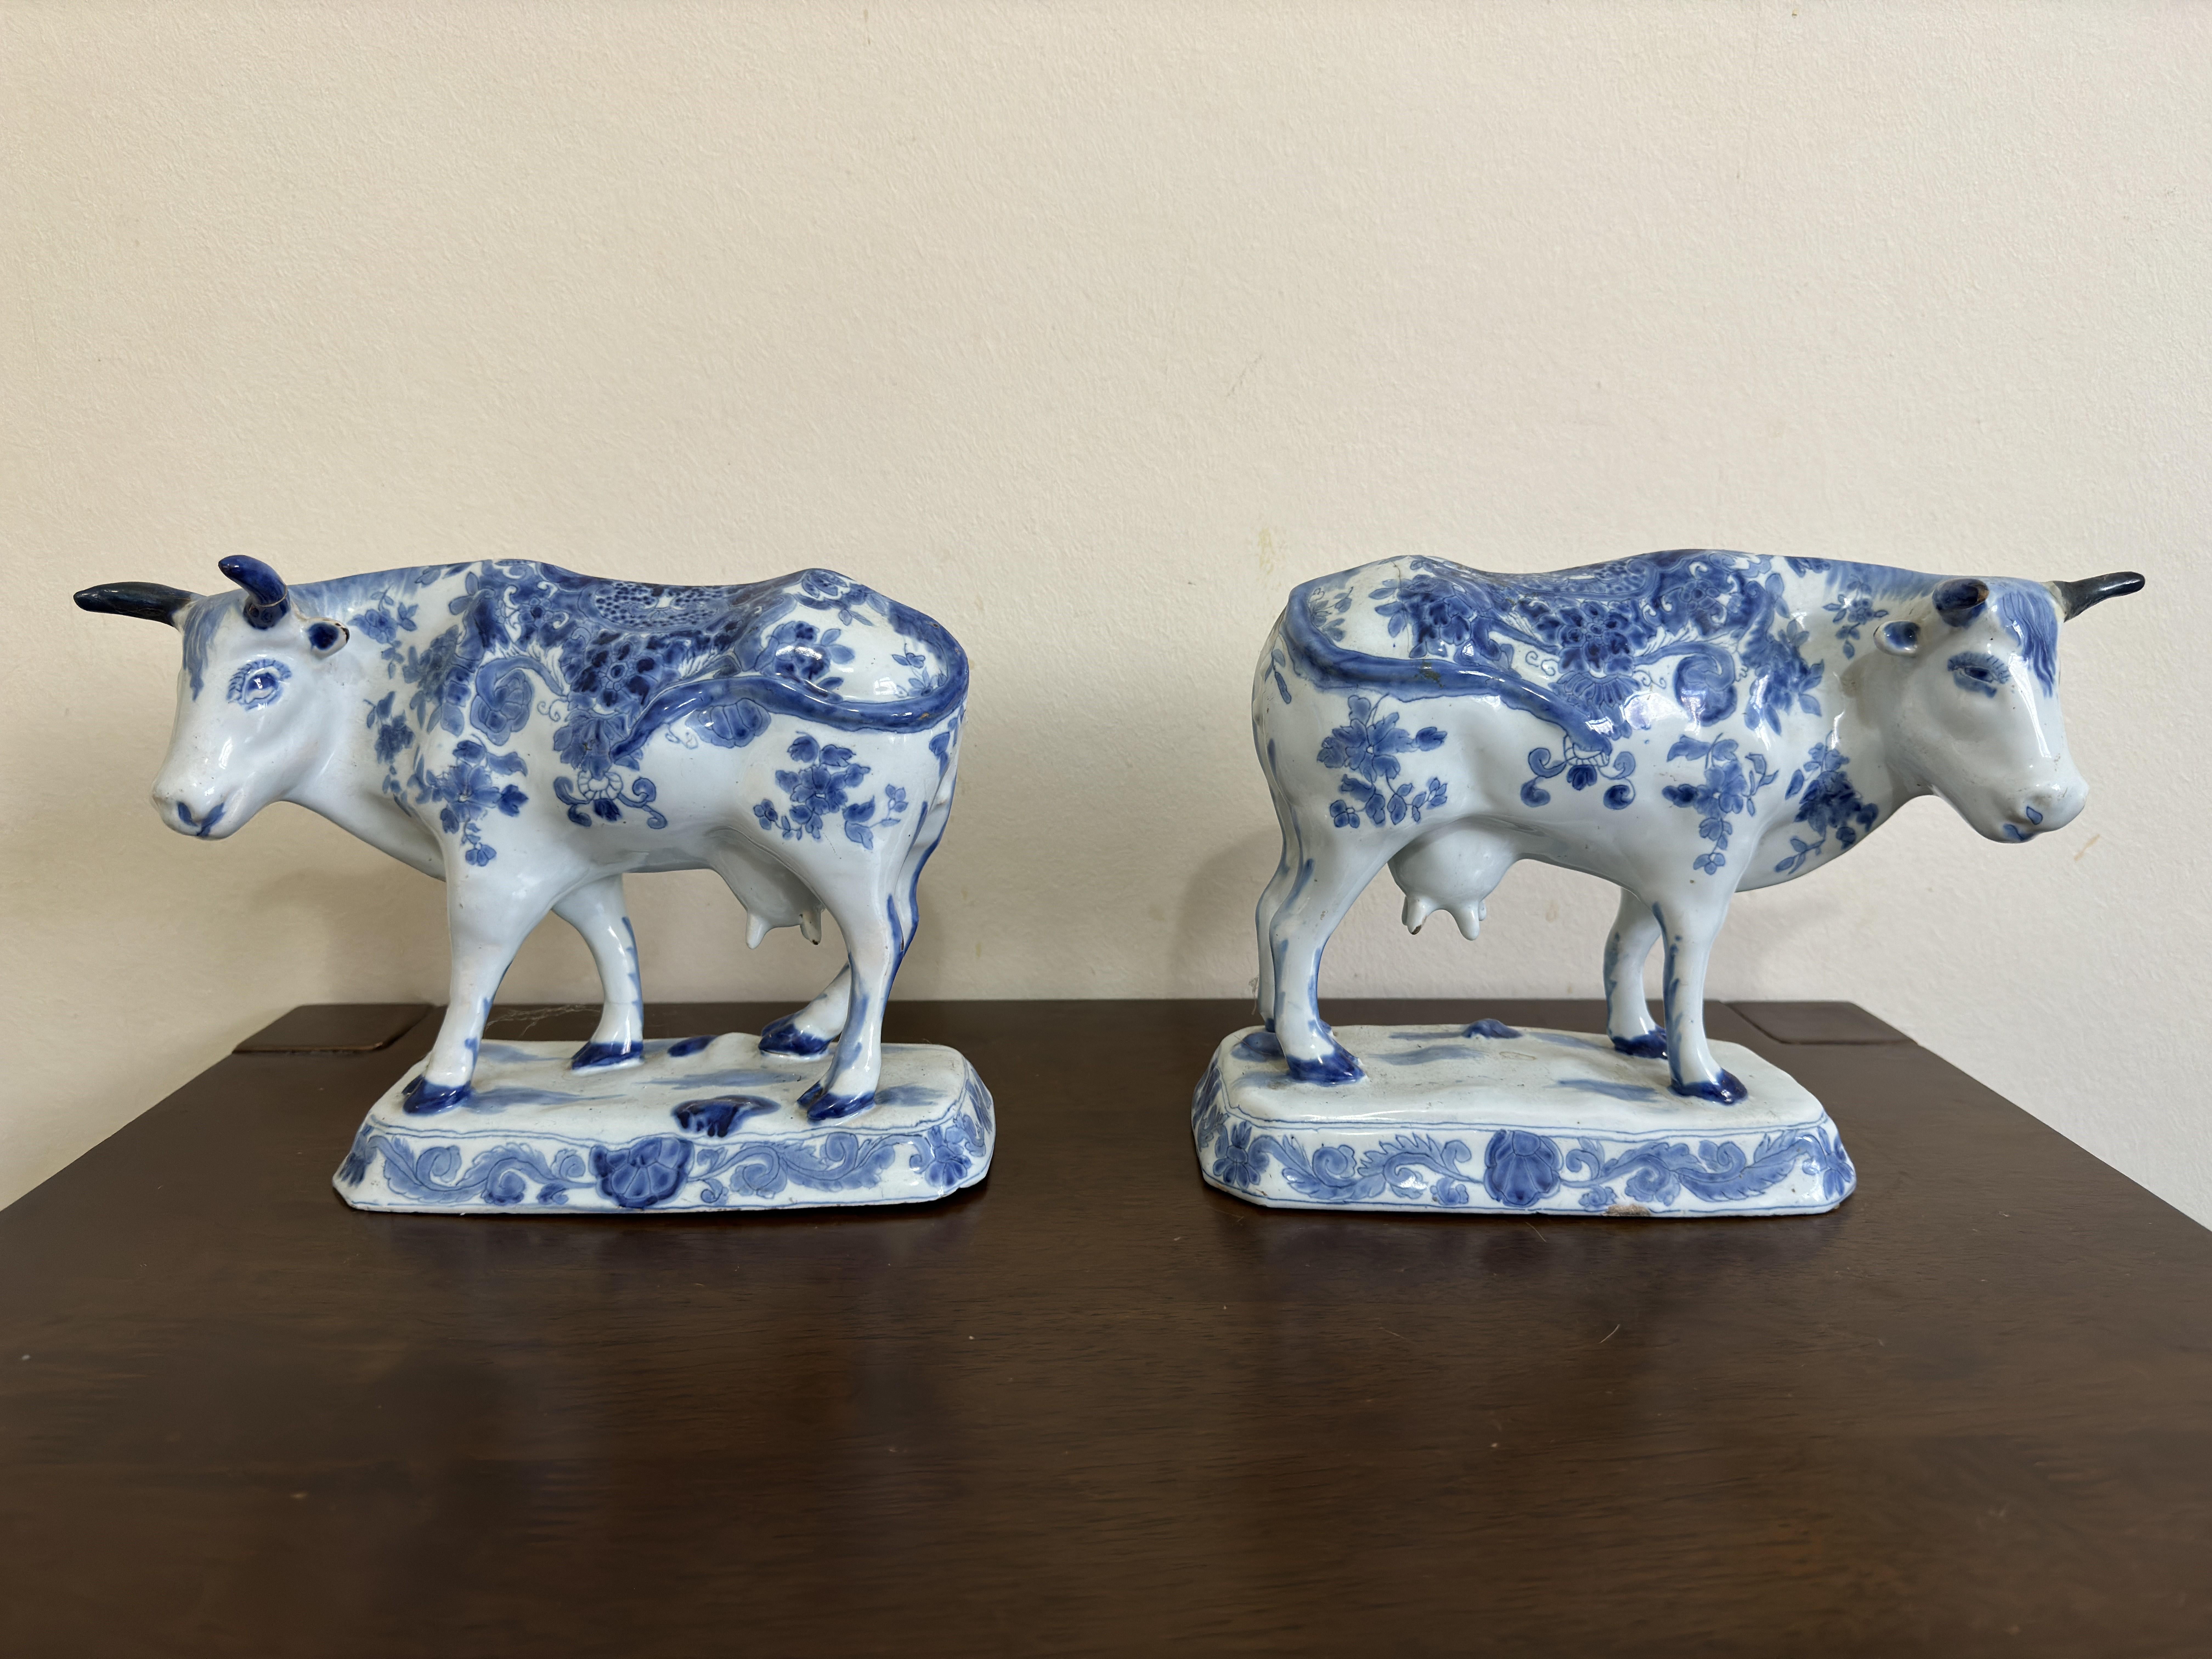 A rare pair of 18th Century Dutch Delft cows, blue and white, made in the De Twee Scheepjes (The Two Little Ships) factory, circa 1780.

24 cm (9 inches) long, 18 cm (7 inches) high, 10 cm (4 inches) depth